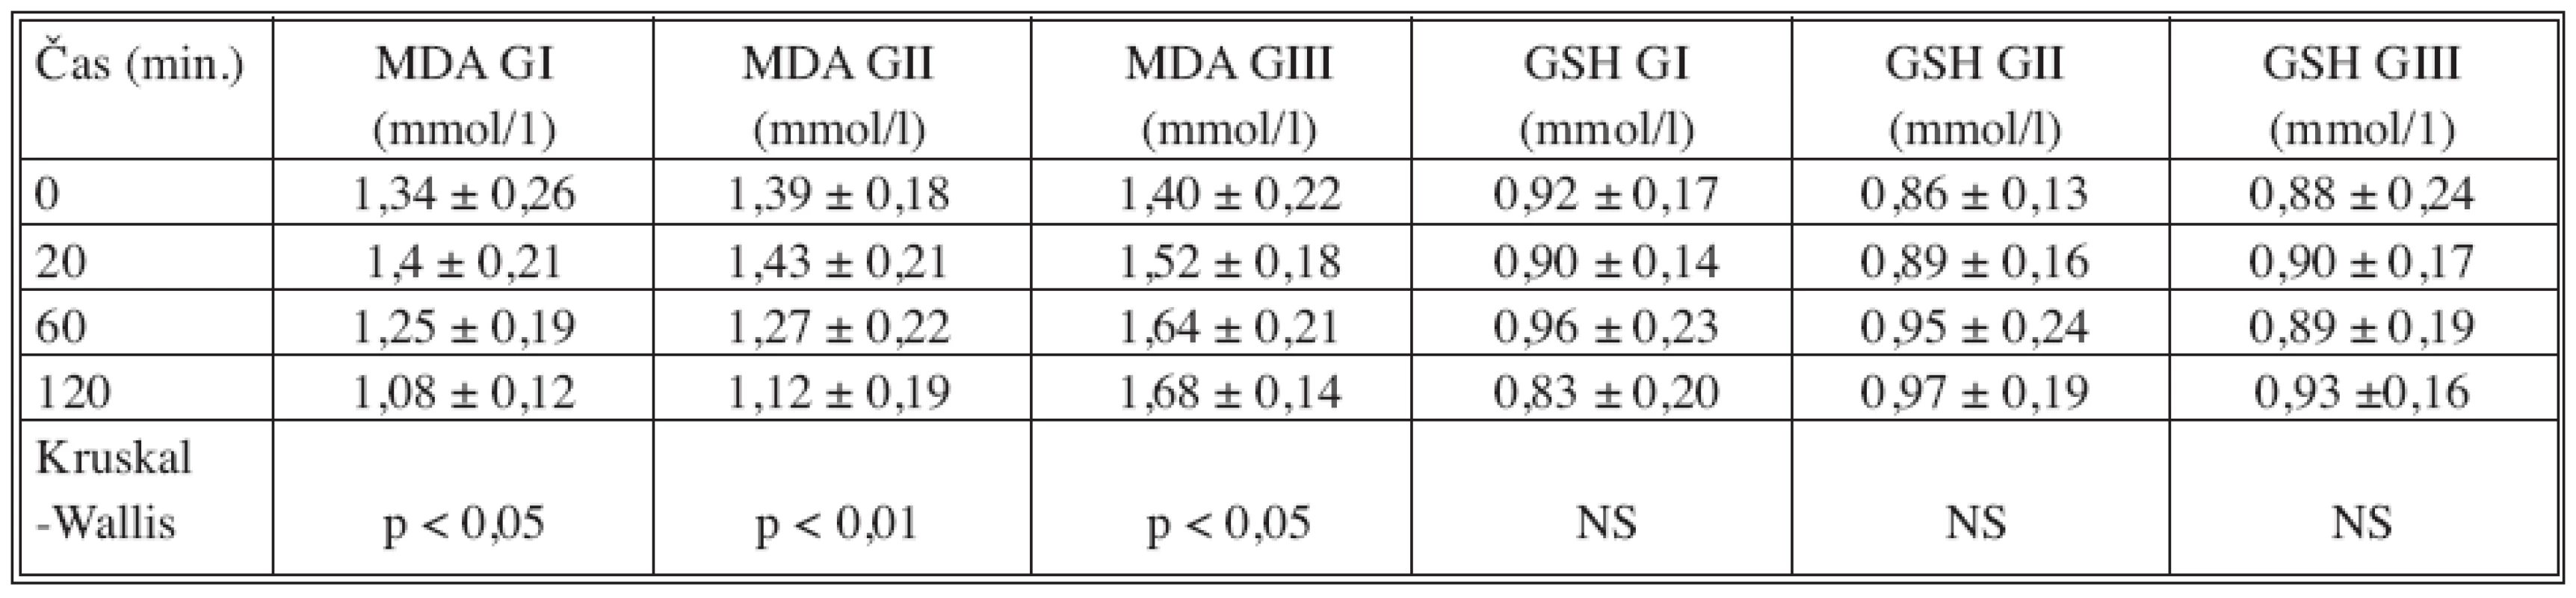 Vývoj plazmatických hladin MDA (mmol/1) a GSH (mmol/1) u SI (N = 14), SII (N = 14) a SIII (N = 13) během 120 minut experimentu (průměrné hodnoty ± SD; NS – není signifikantní)
Tab. 1. The course of the MDA (mmol/1) and GSH (mmol/1) plasma levels in SI (N = 14), SII (N = 14) and SIII (N = 13) over the 120-minute experiment (mean values ± SD; NS – insignificant)